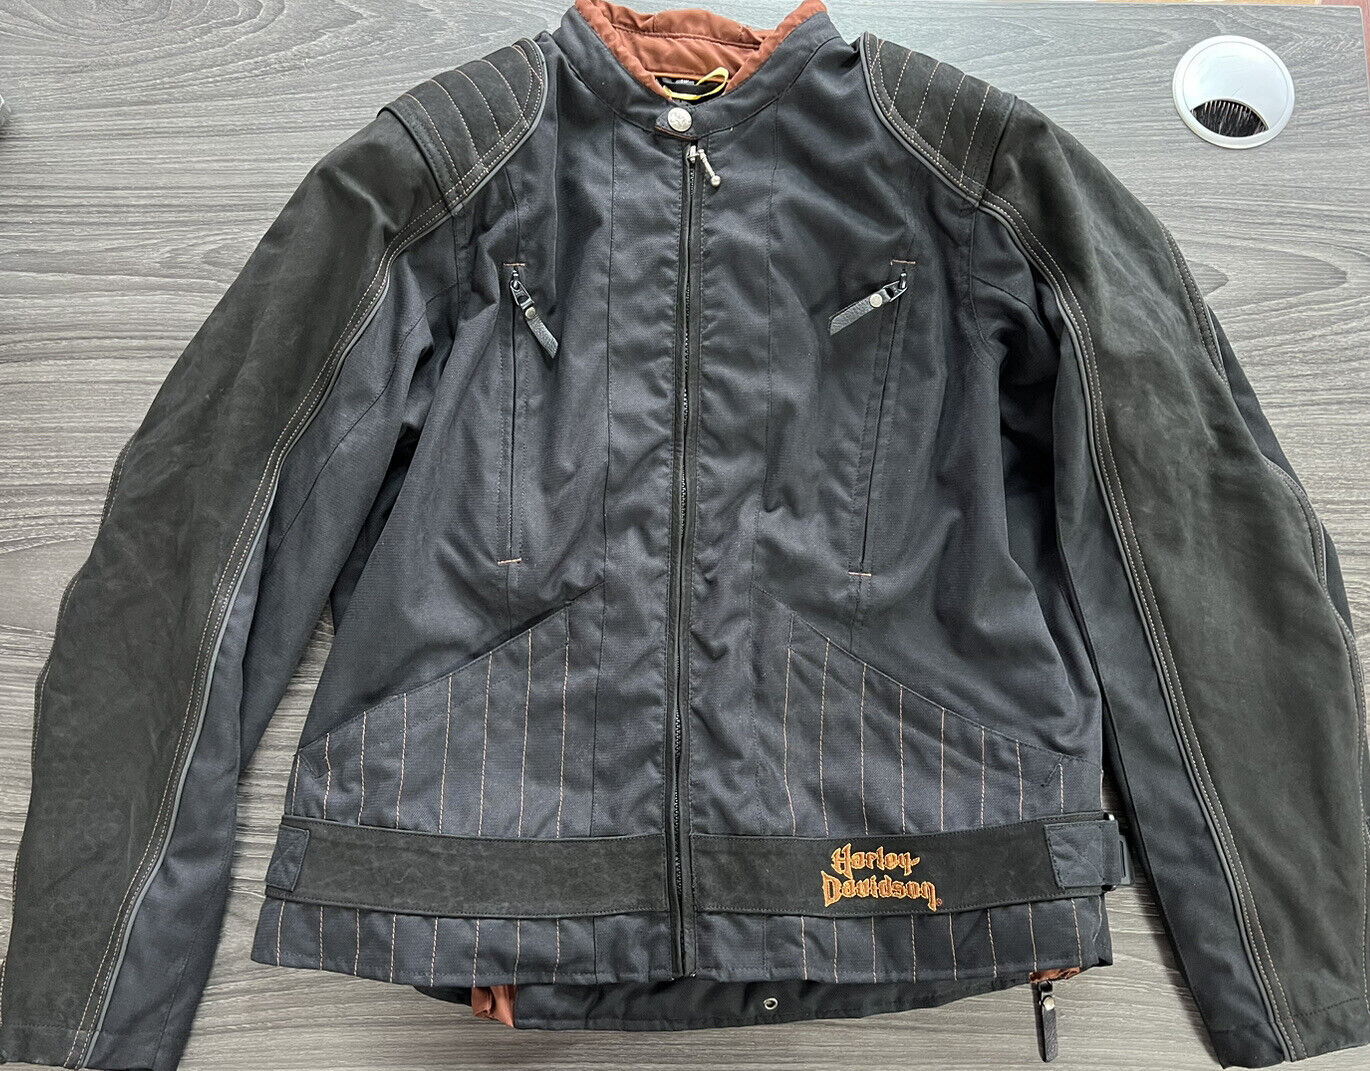 Genuine ￼Harley Davidson Jacket After Dry Cleaning, Great Condition Size 1W